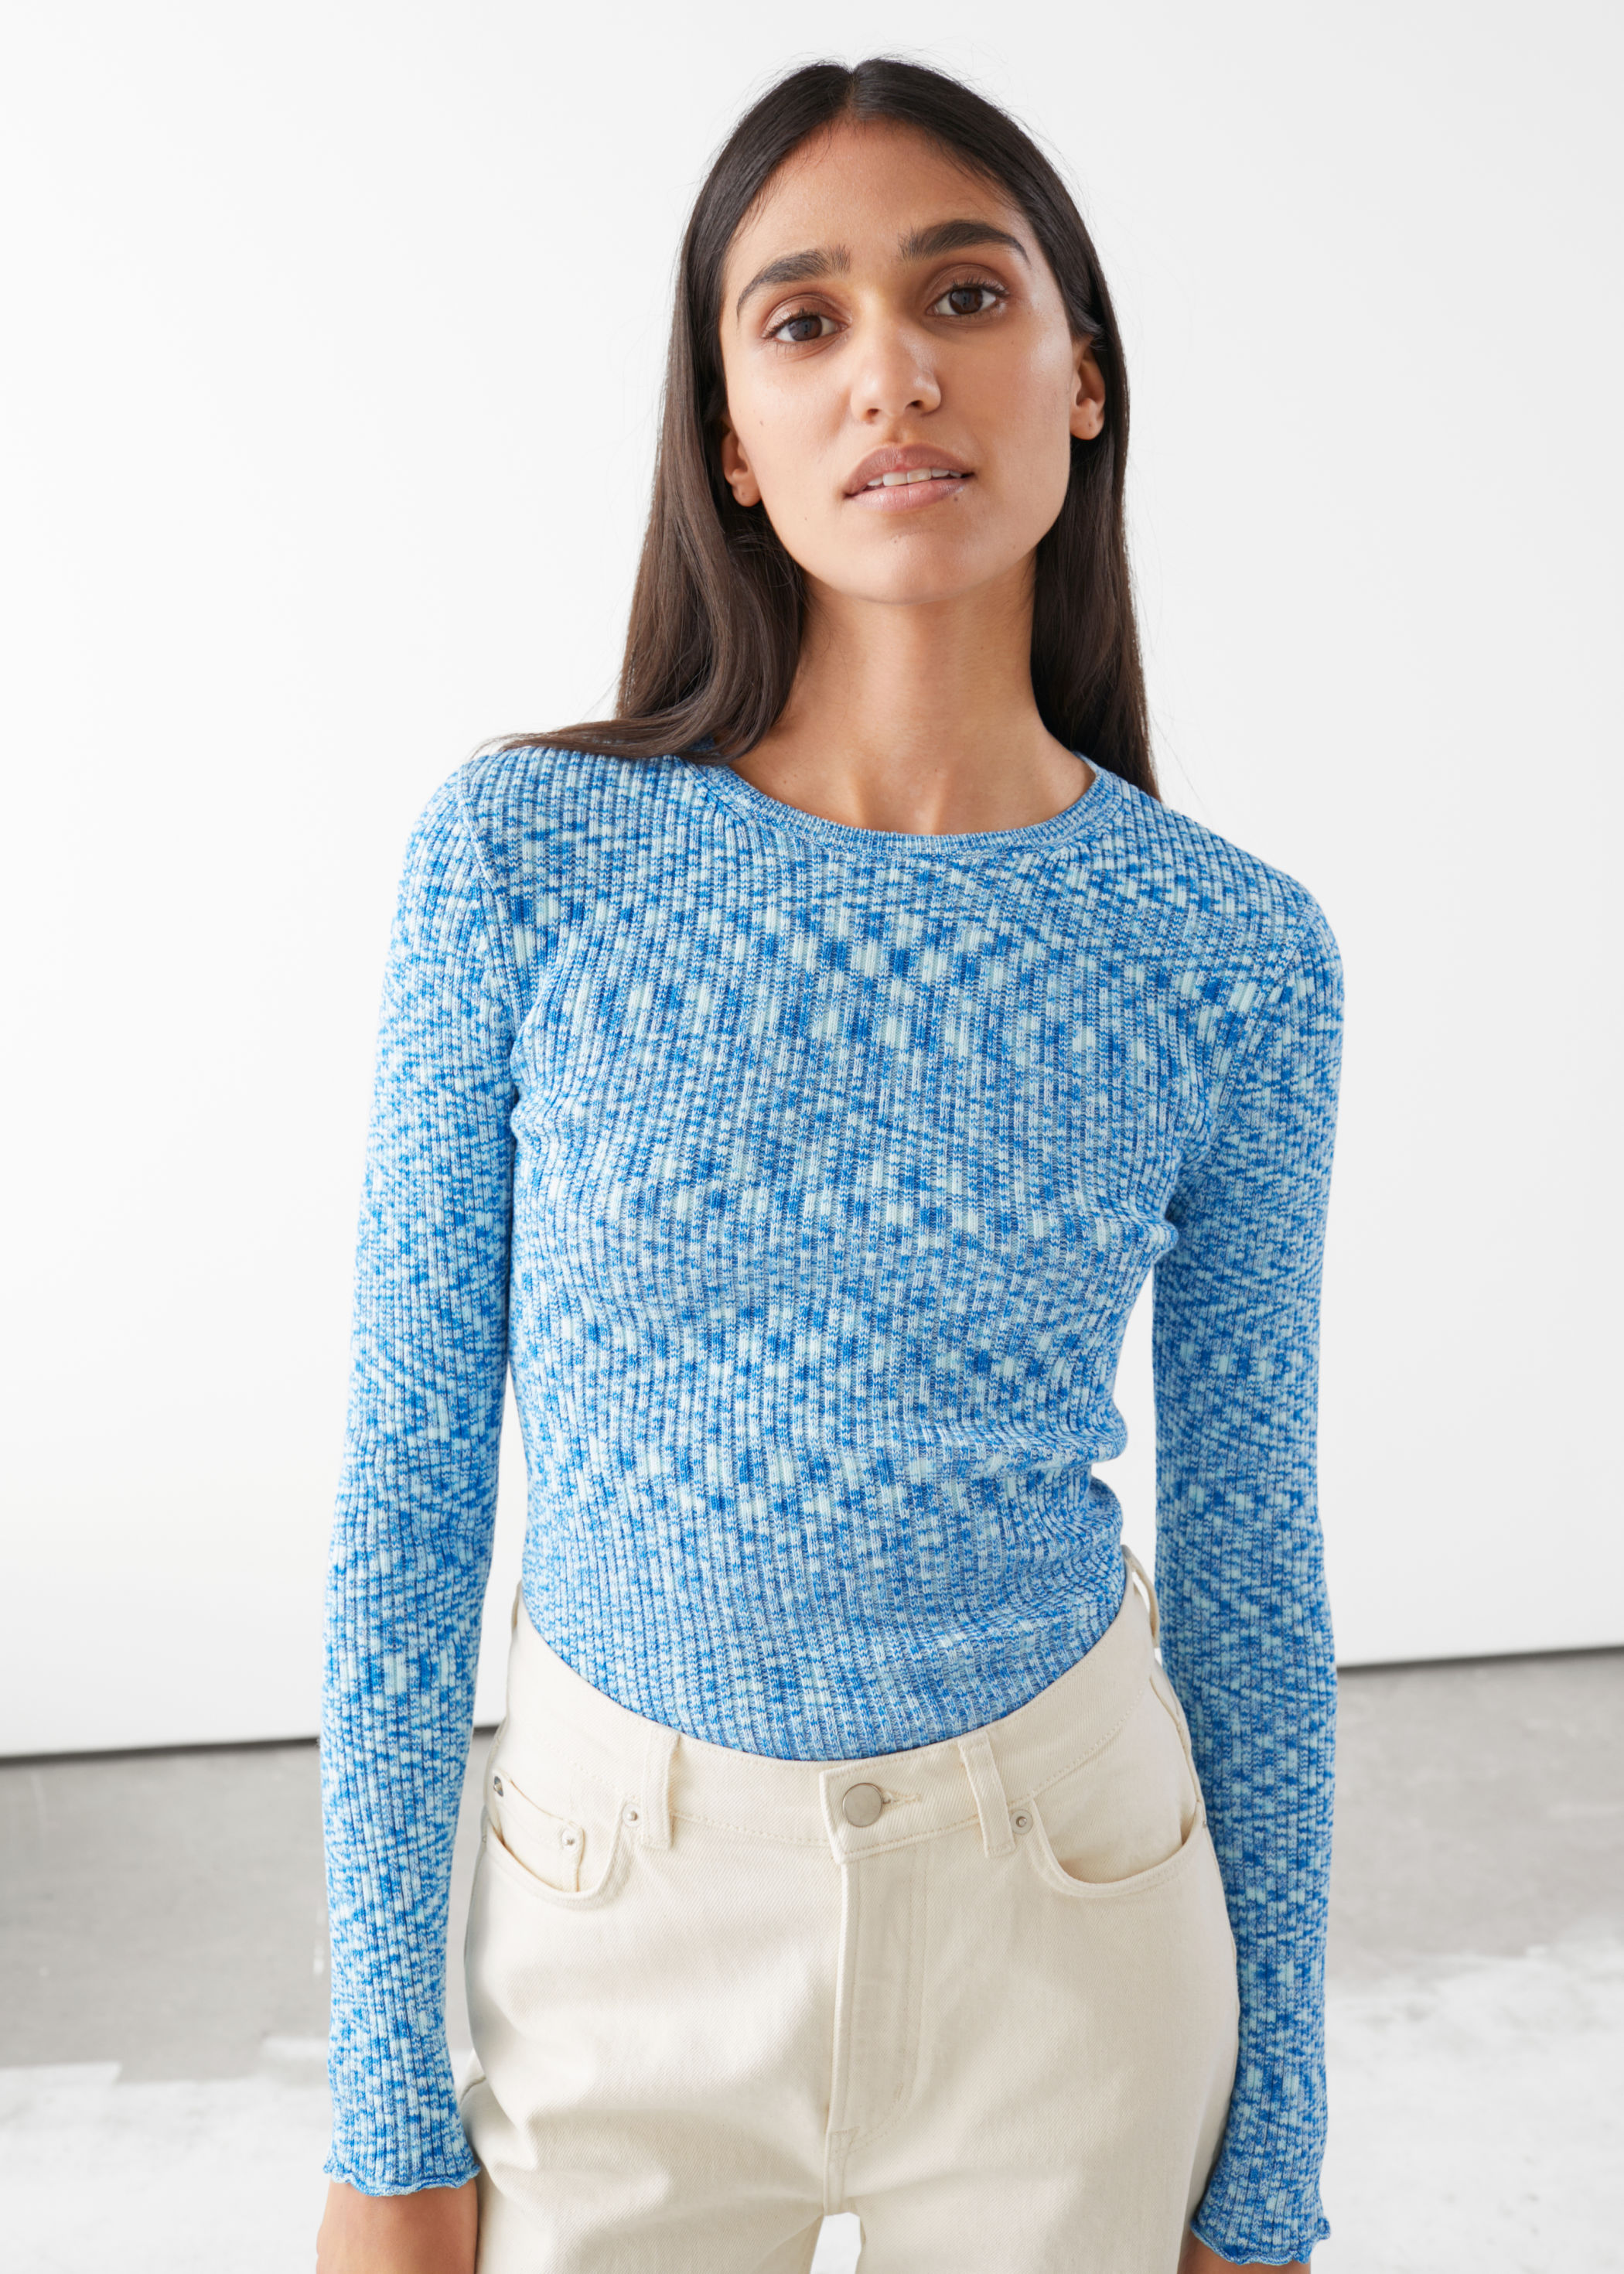  Other Stories. Organic Cotton Lyocell Blend Sweater